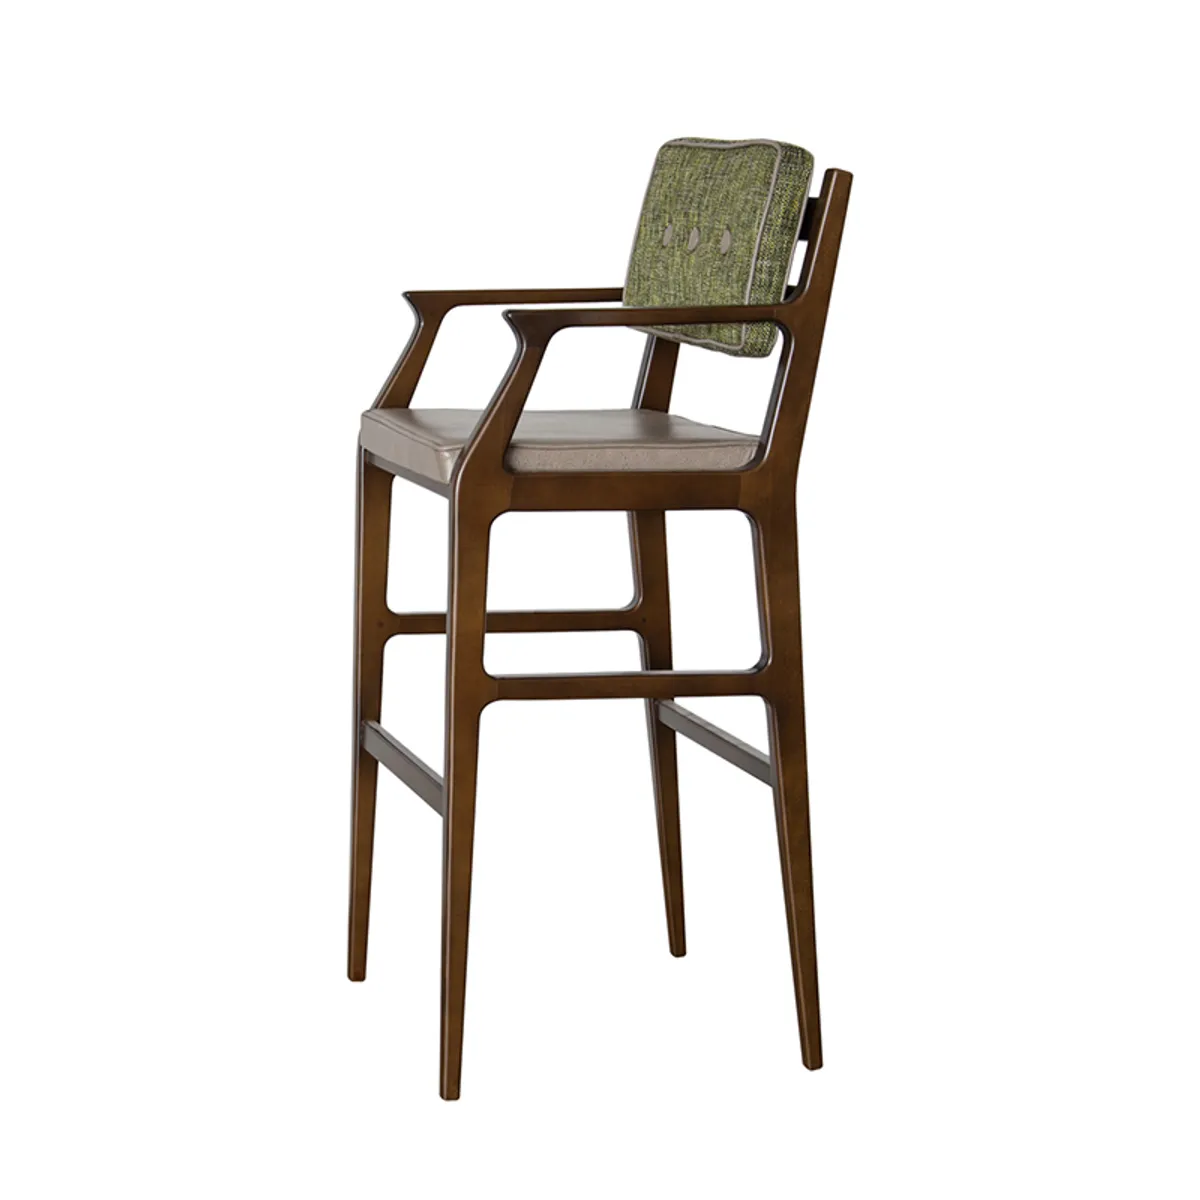 Linden Bar Stool Wooden Frame Stool For Bars And Hotels113